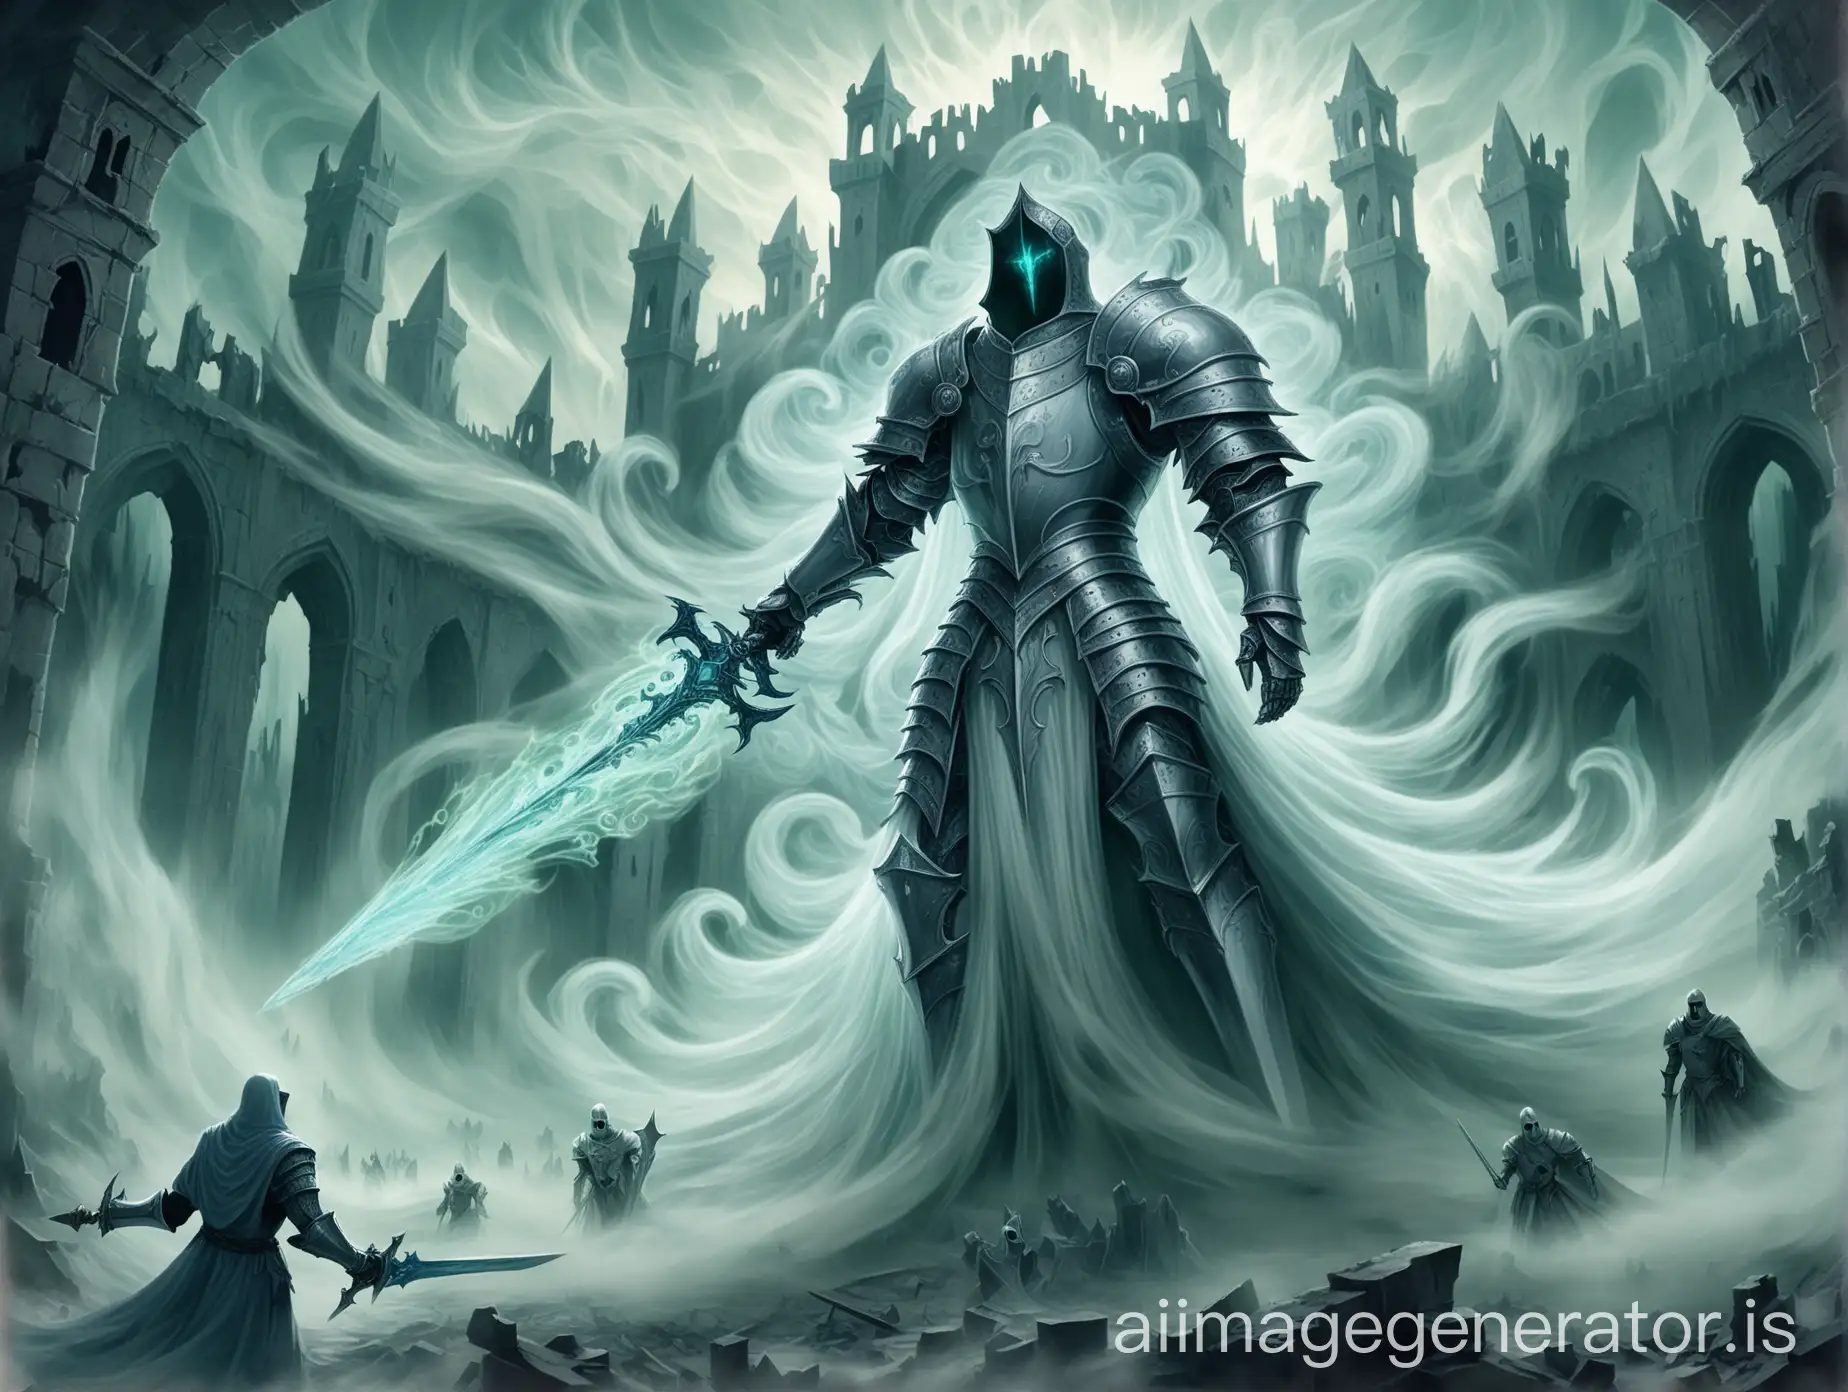 Craft a digital artwork of a determined knight, surrounded by swirling mist, battling a gargantuan, spectral specter amidst the ruins of a forgotten citadel. The specter's ethereal form billows and shifts with unearthly grace as it assails the knight, who stands undaunted against the ghostly onslaught.